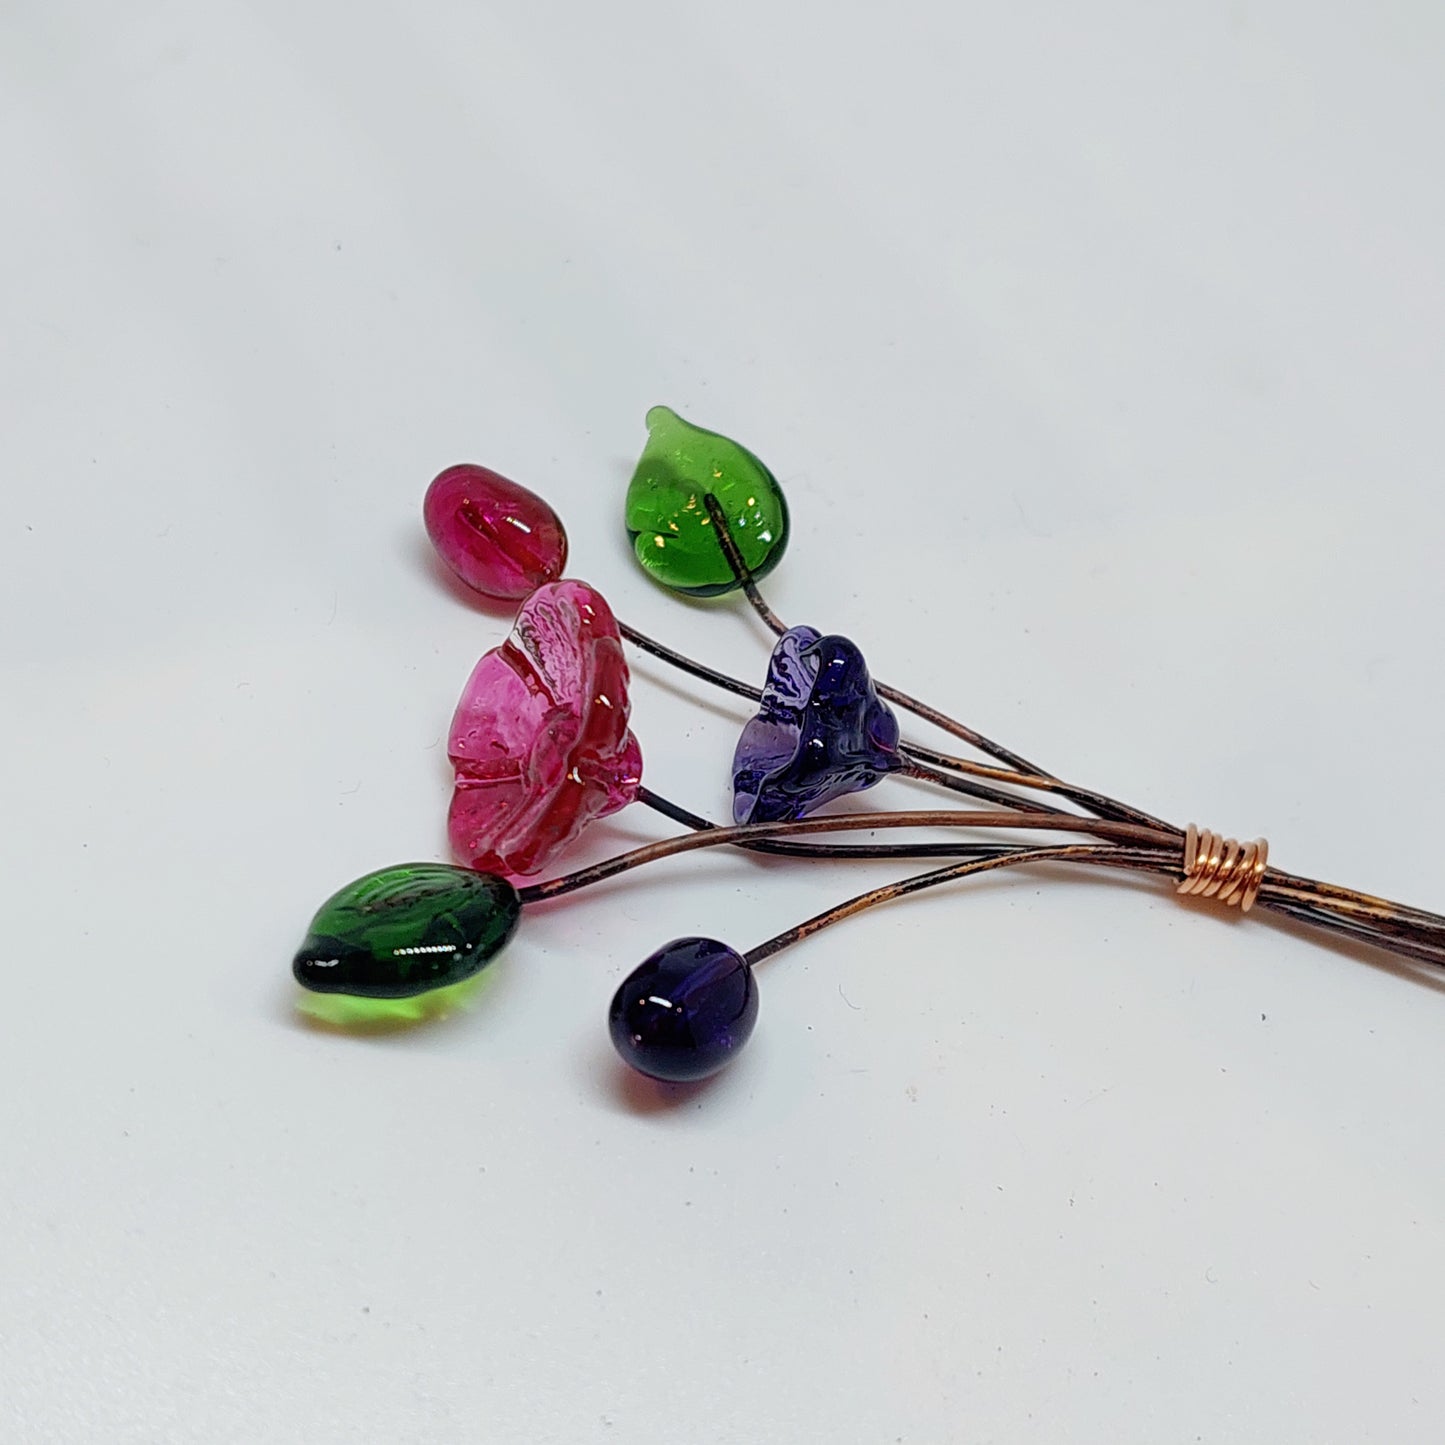 BESTSELLER!! Glass Art - Tiny Bouquets - Berry Shades